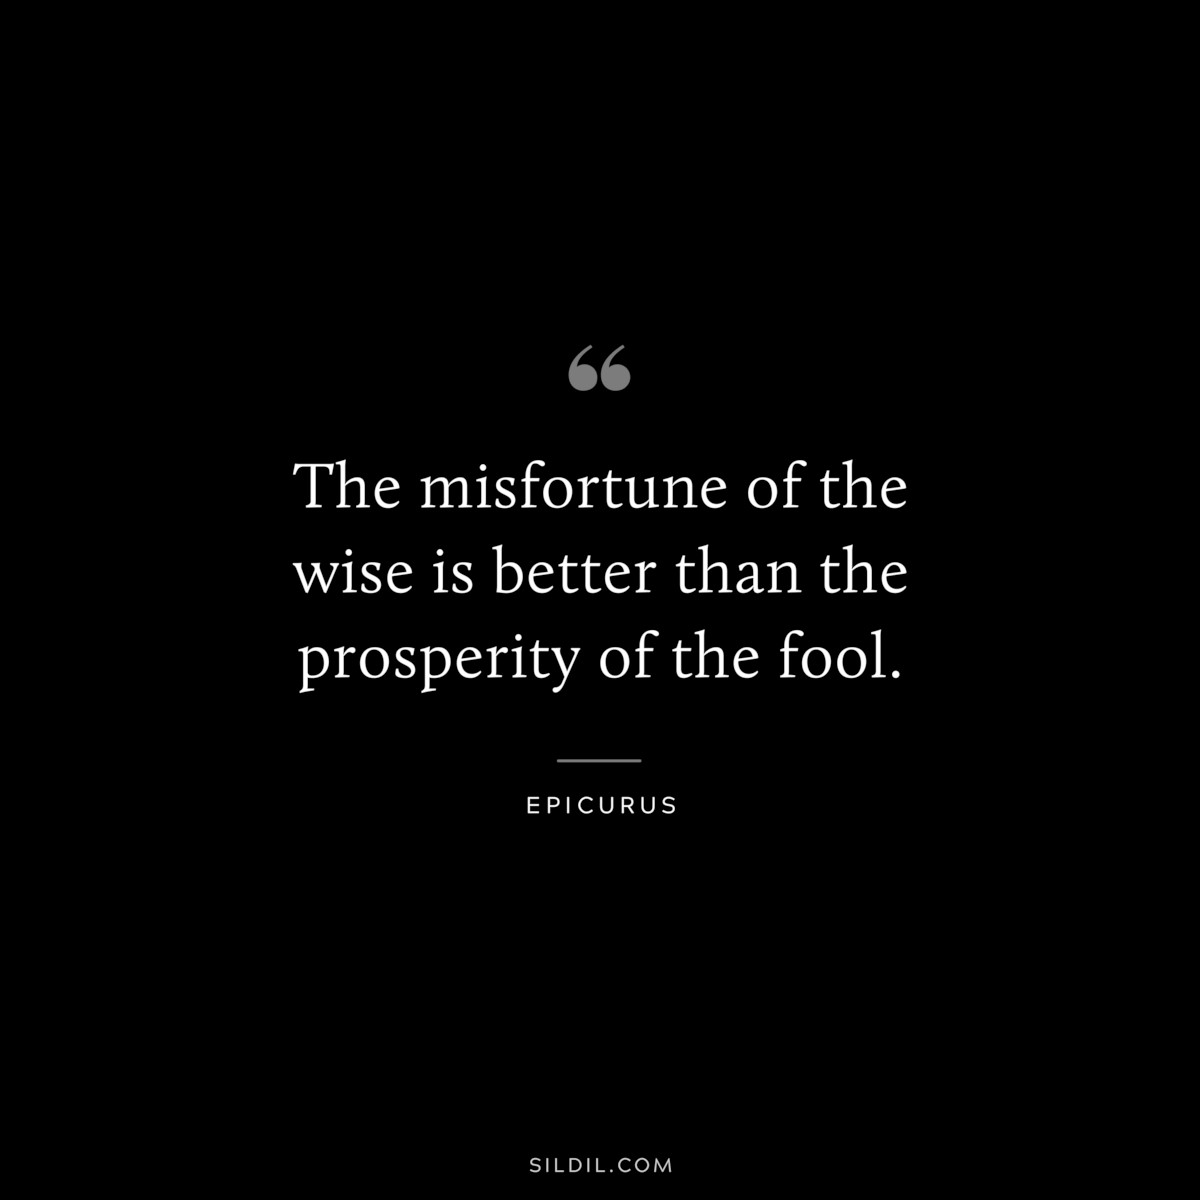 The misfortune of the wise is better than the prosperity of the fool. — Epicurus